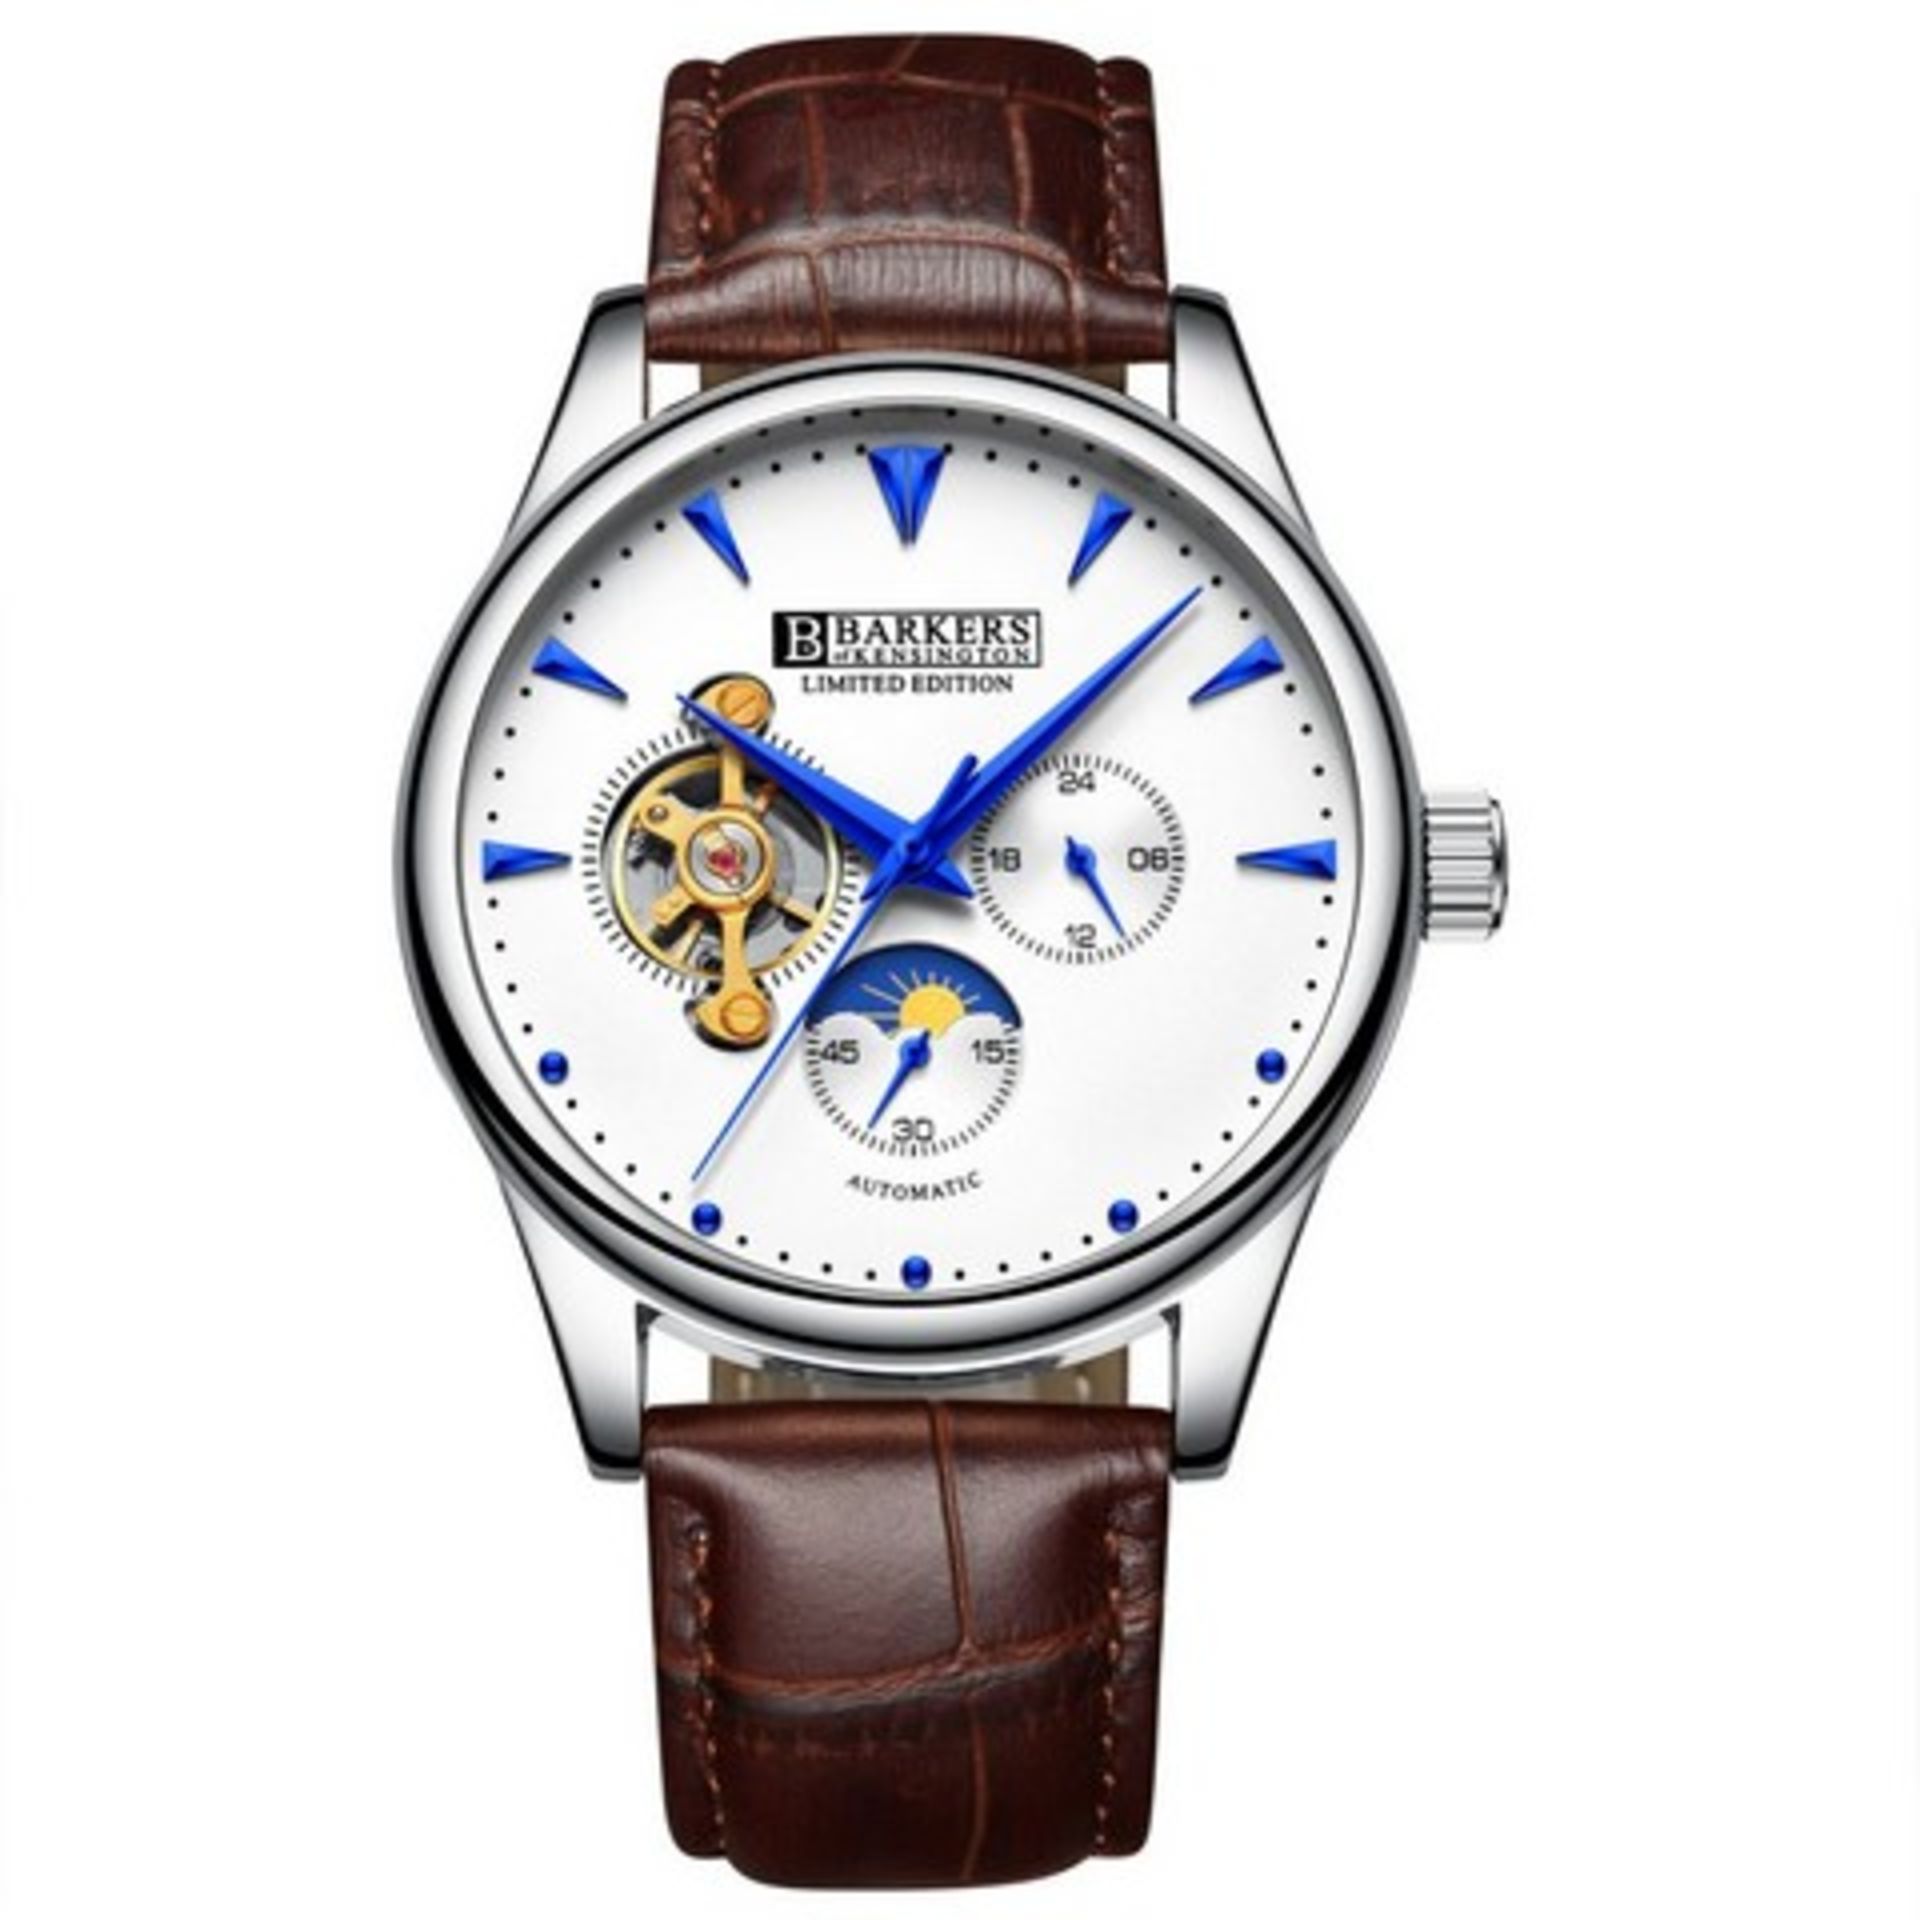 V Brand New Barkers Of Kensington Gents Limited Edition Automatic Watch with Blue Hands and